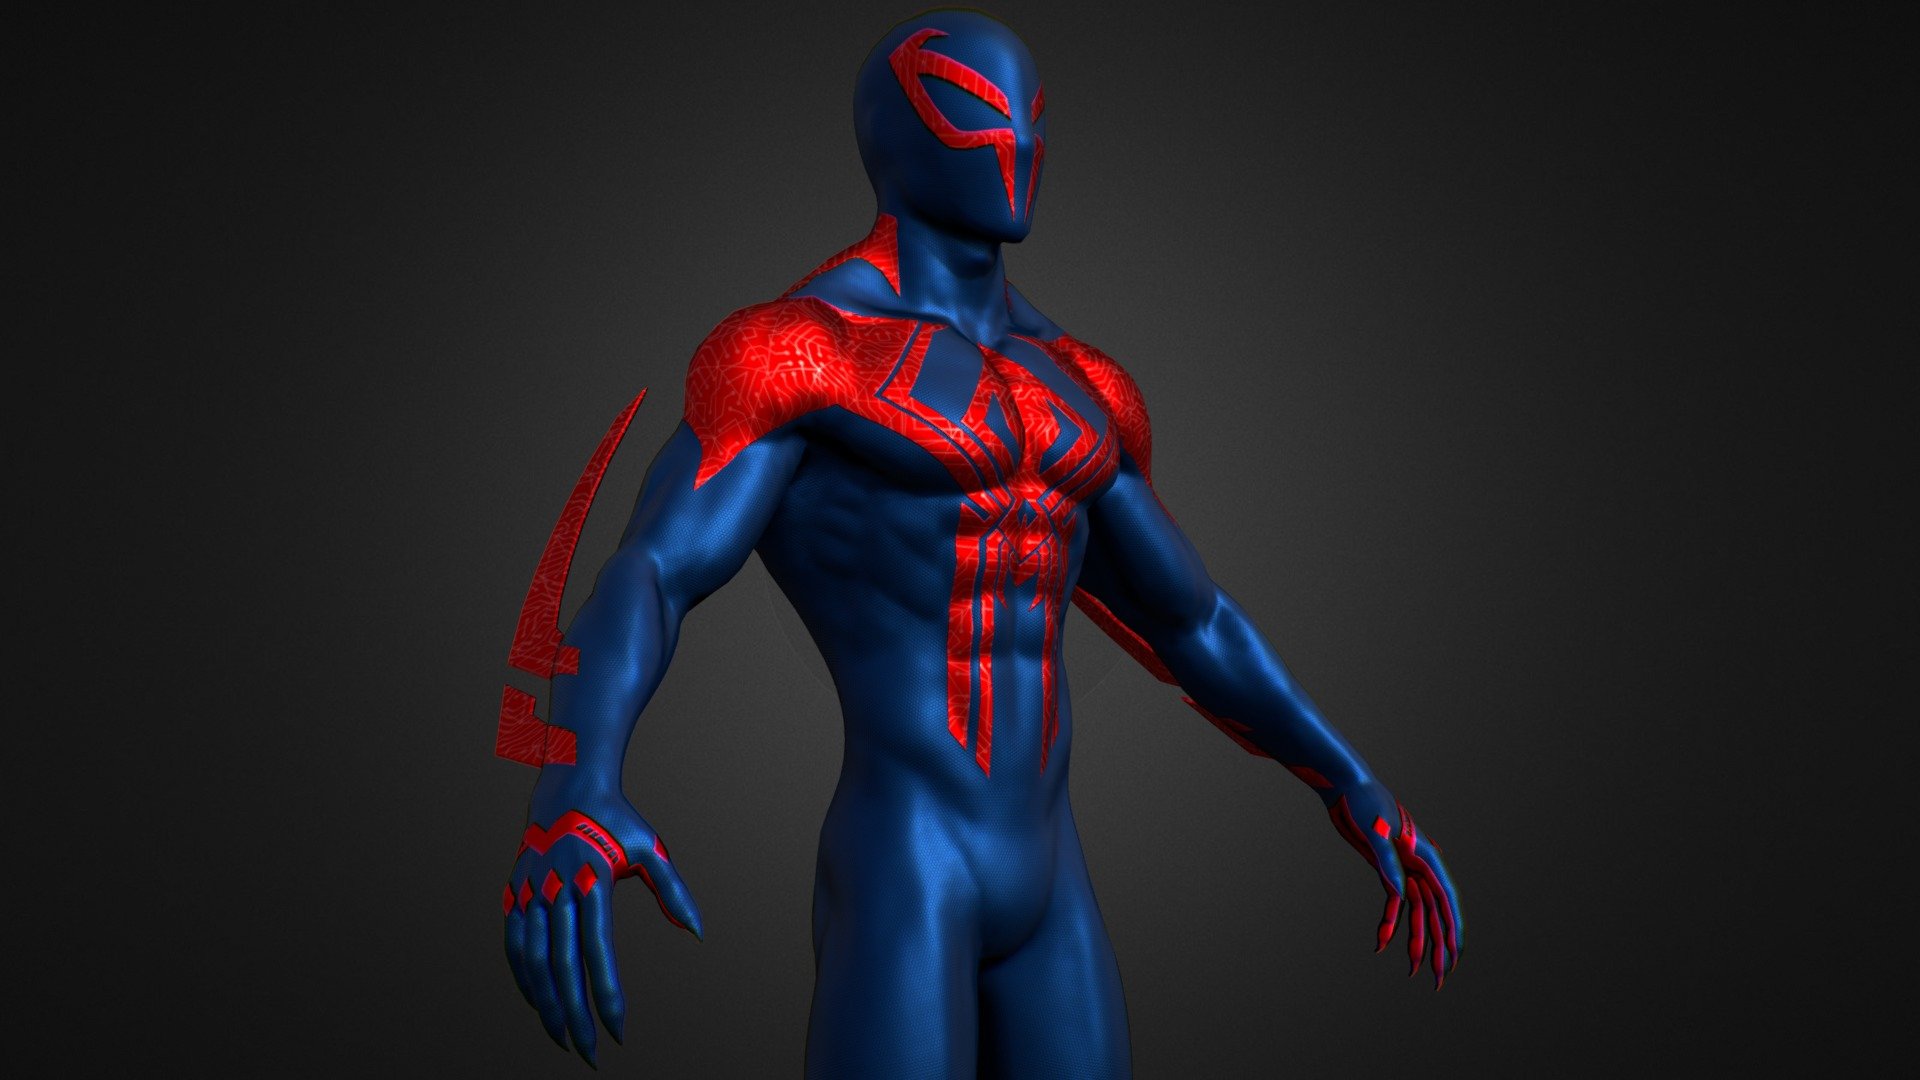 Spiderman comic books character published by Marvel Comics

Prodigy-level geneticist Miguel O’Hara gives himself spider-like abilities in an experiment gone wrong. He sees an opportunity to protect ordinary people against abusive corporations, and decides to use his powers for good and become Spider-Man of the year 2099




Model was made on Maya, Zbrush, substance painter  and Blender 

Inspired by marvel spider-man across the spider-verse spiderman-2099 suit.

The model has a Spider-man 2099 suit

High quality texture work.

The model come with complete 8k textures and Blender, FBX And OBJ file formats 

The model has 1 material contains 5 maps Basecolor, Roughness, - Metalness, Normal, and Ao

All textures and materials are included and mapped. (8k resoulutions)

No special plugin needed to open scene

The model can be rigg easily
 - Miguel O'hara Spider-Man Across The Spider-Verse - Buy Royalty Free 3D model by AFSHAN ALI (@Aliflex) 3d model